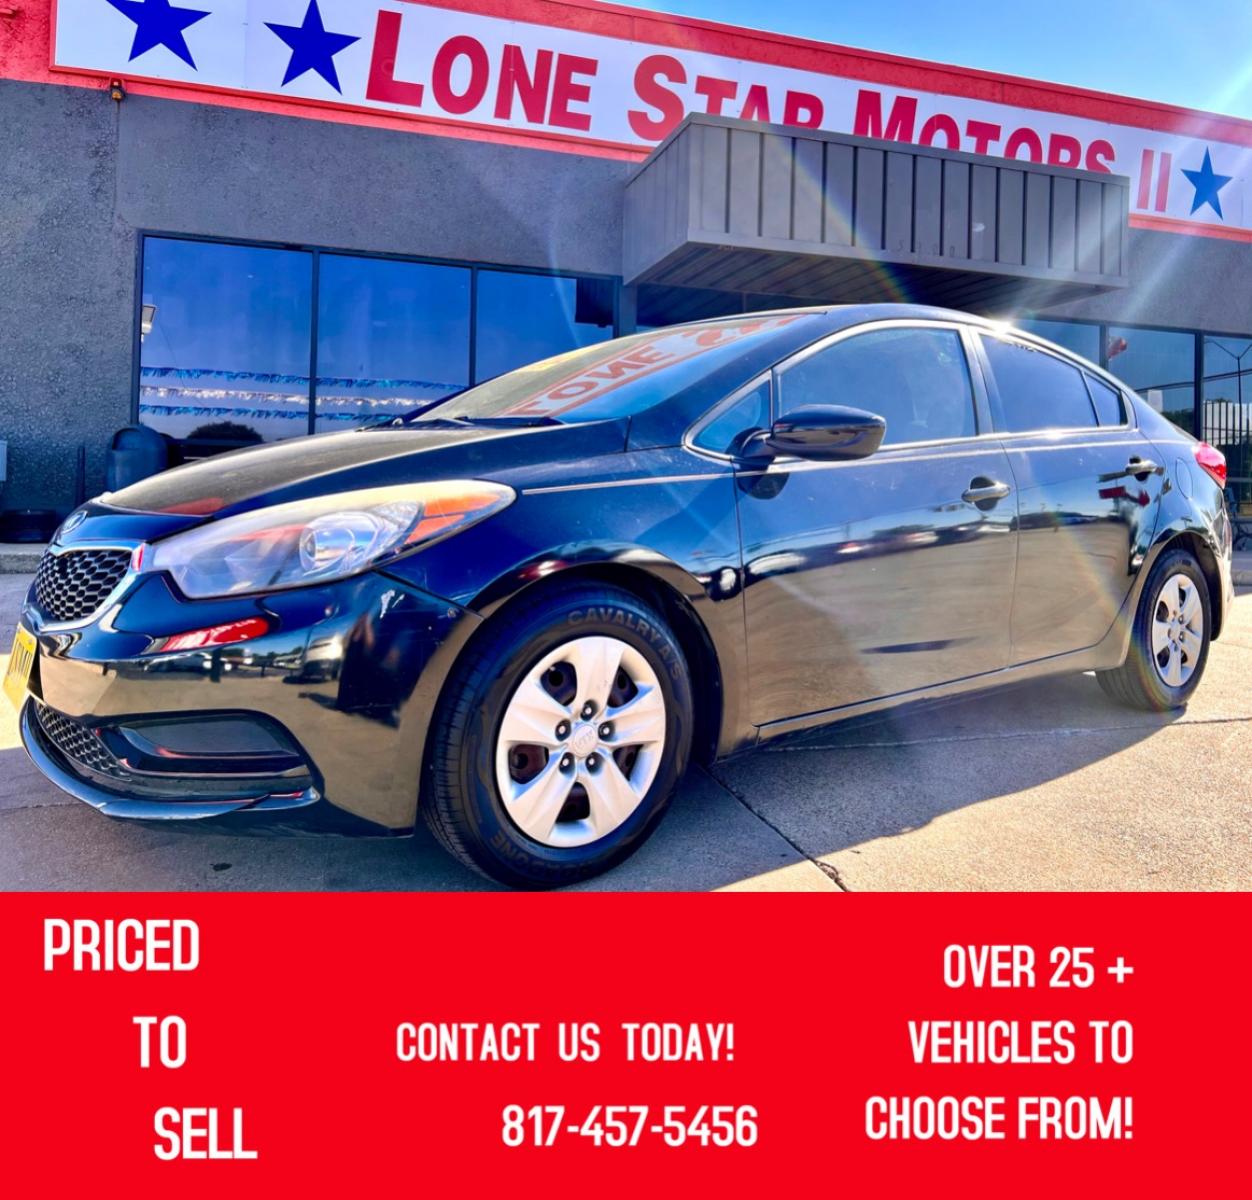 2016 BLACK KIA FORTE LX (KNAFK4A61G5) , located at 5900 E. Lancaster Ave., Fort Worth, TX, 76112, (817) 457-5456, 0.000000, 0.000000 - Cash CASH CAR ONLY, NO FINANCING AVAILABLE. THIS 2016 KIA FORTE LX 4 DOOR SEDAN RUNS AND DRIVES GREAT. IT IS EQUIPPED WITH A CD PLAYER, AM/FM RADIO AND AN AUX PORT. THE TIRES ARE IN GOOD CONDITION AND STILL HAVE TREAD LEFT ON THEM. THIS CAR WILL NOT LAST SO ACT FAST! Call or text Frances a - Photo #0